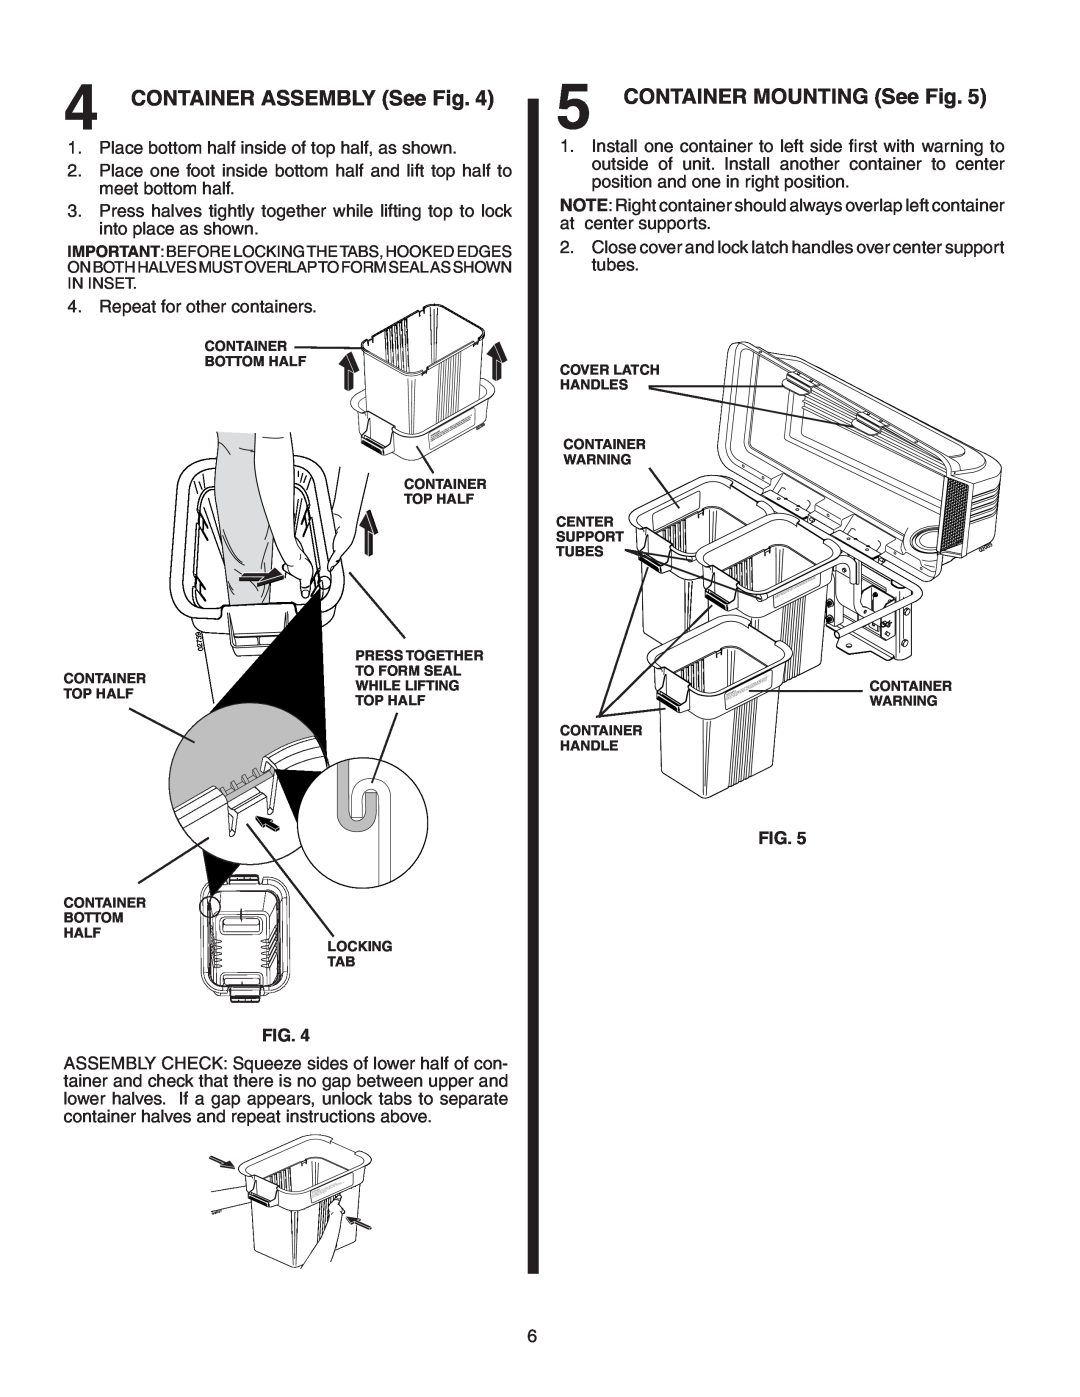 Poulan GTB54A, 532190226 owner manual CONTAINER ASSEMBLY See Fig, CONTAINER MOUNTING See Fig 